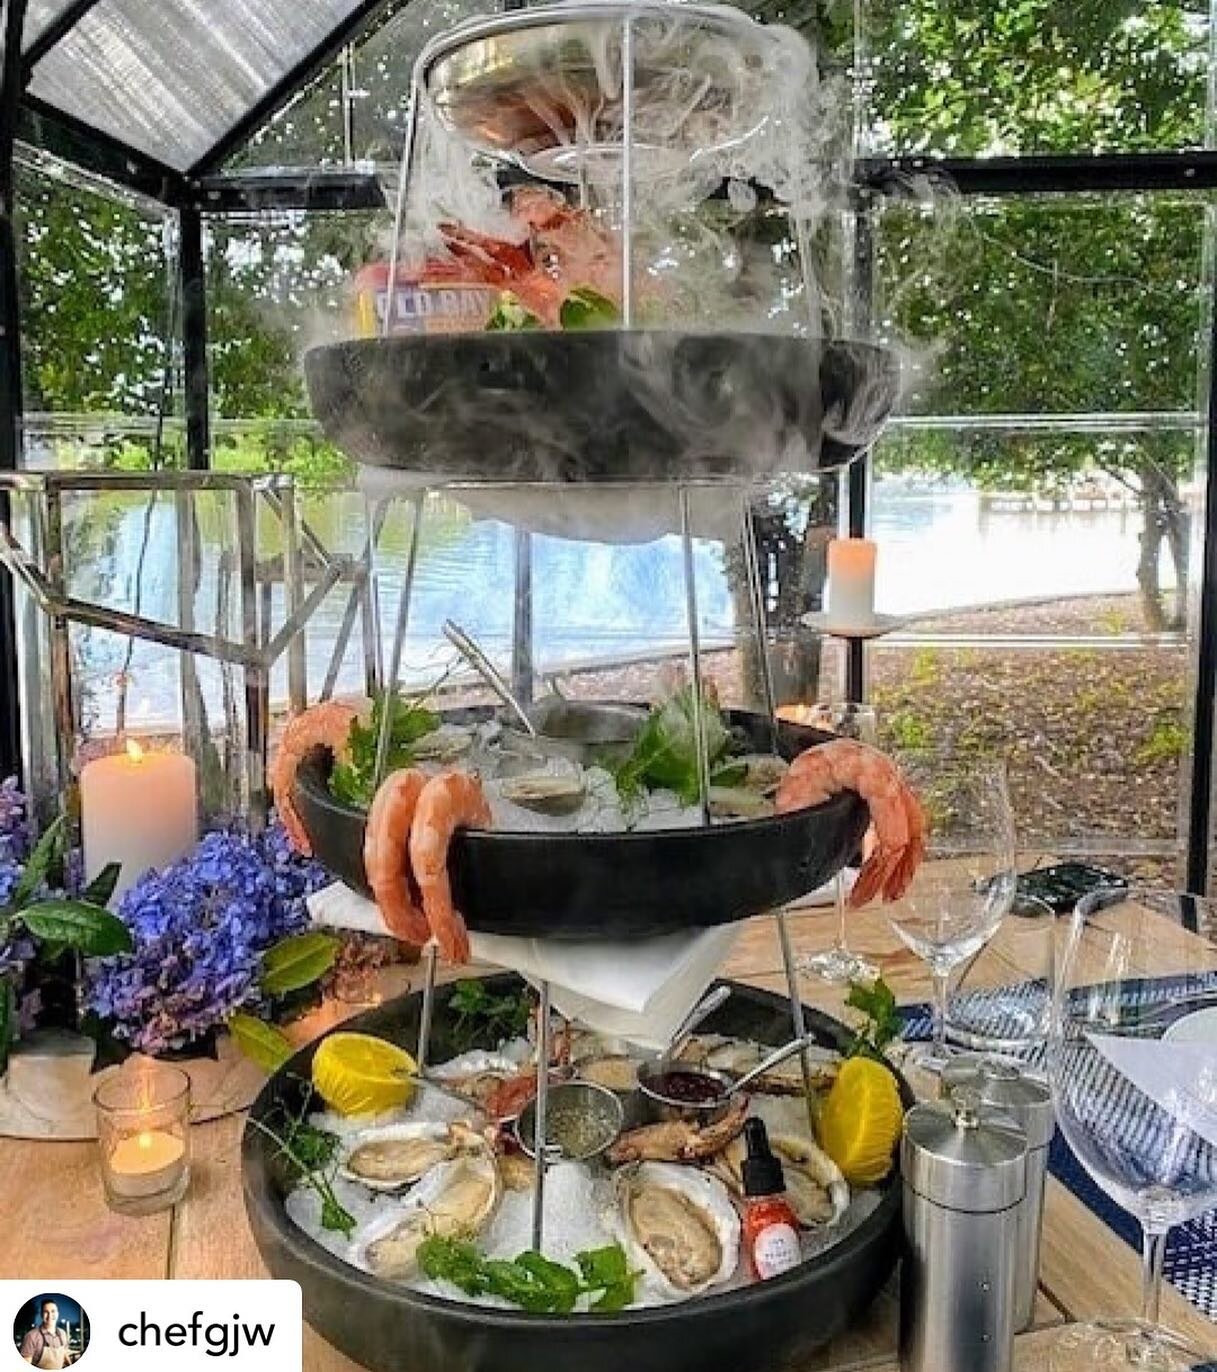 Awesome setup from Chef Greg and team at Inn at Perry Cabin @innatperrycabin @chefgjw ... you guys are killing it! 
Get fresh and delicious Harris Creek oysters 🦪 and other amazing food all summer long at IAPC! 
.
.
.
.
#innatperrycabin #innatperryc